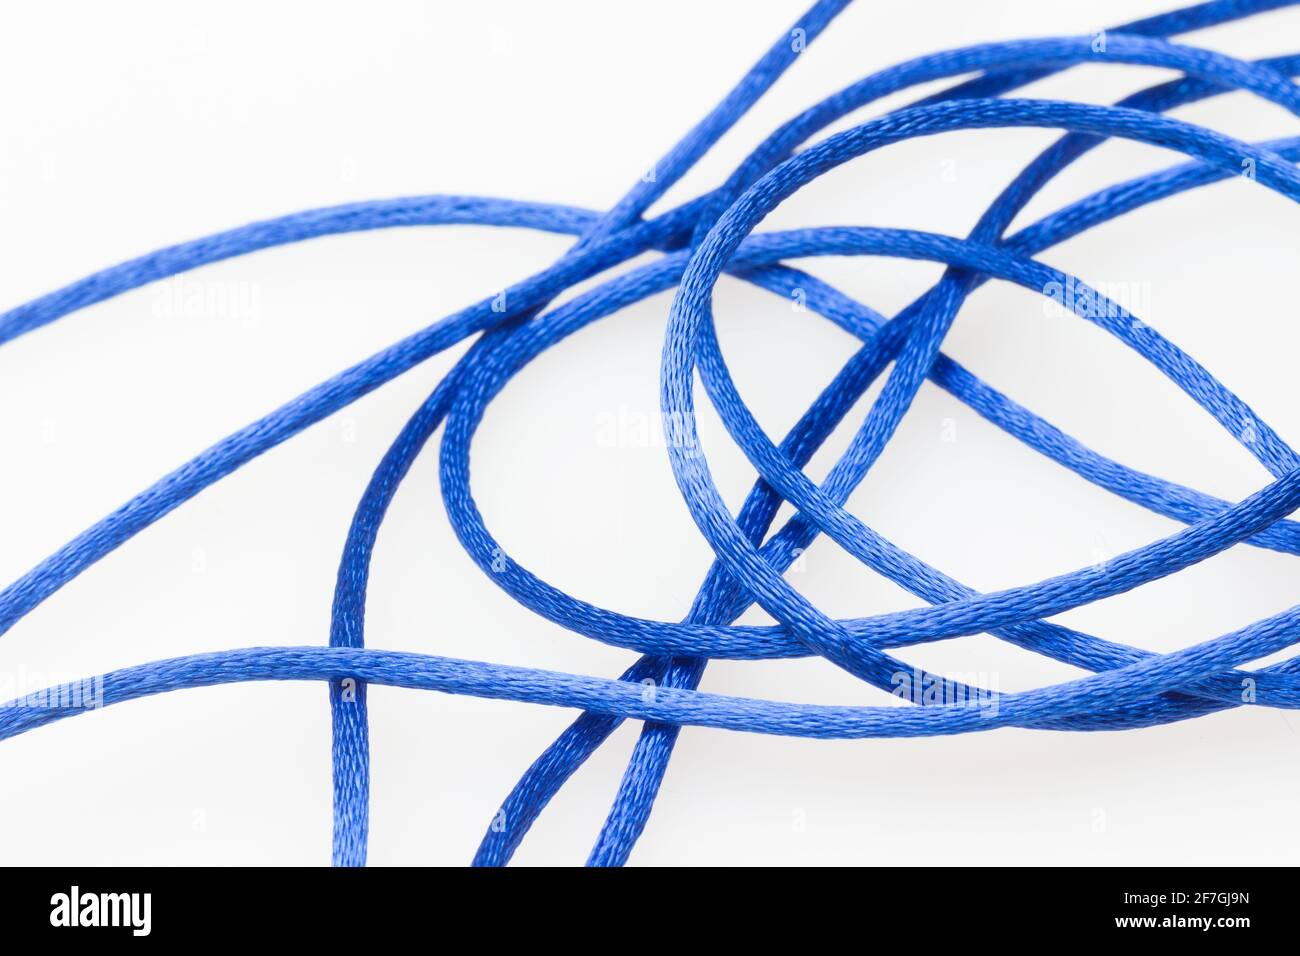 blue messy string, string out of coil a bit messy; blue string on white  background Stock Photo - Alamy